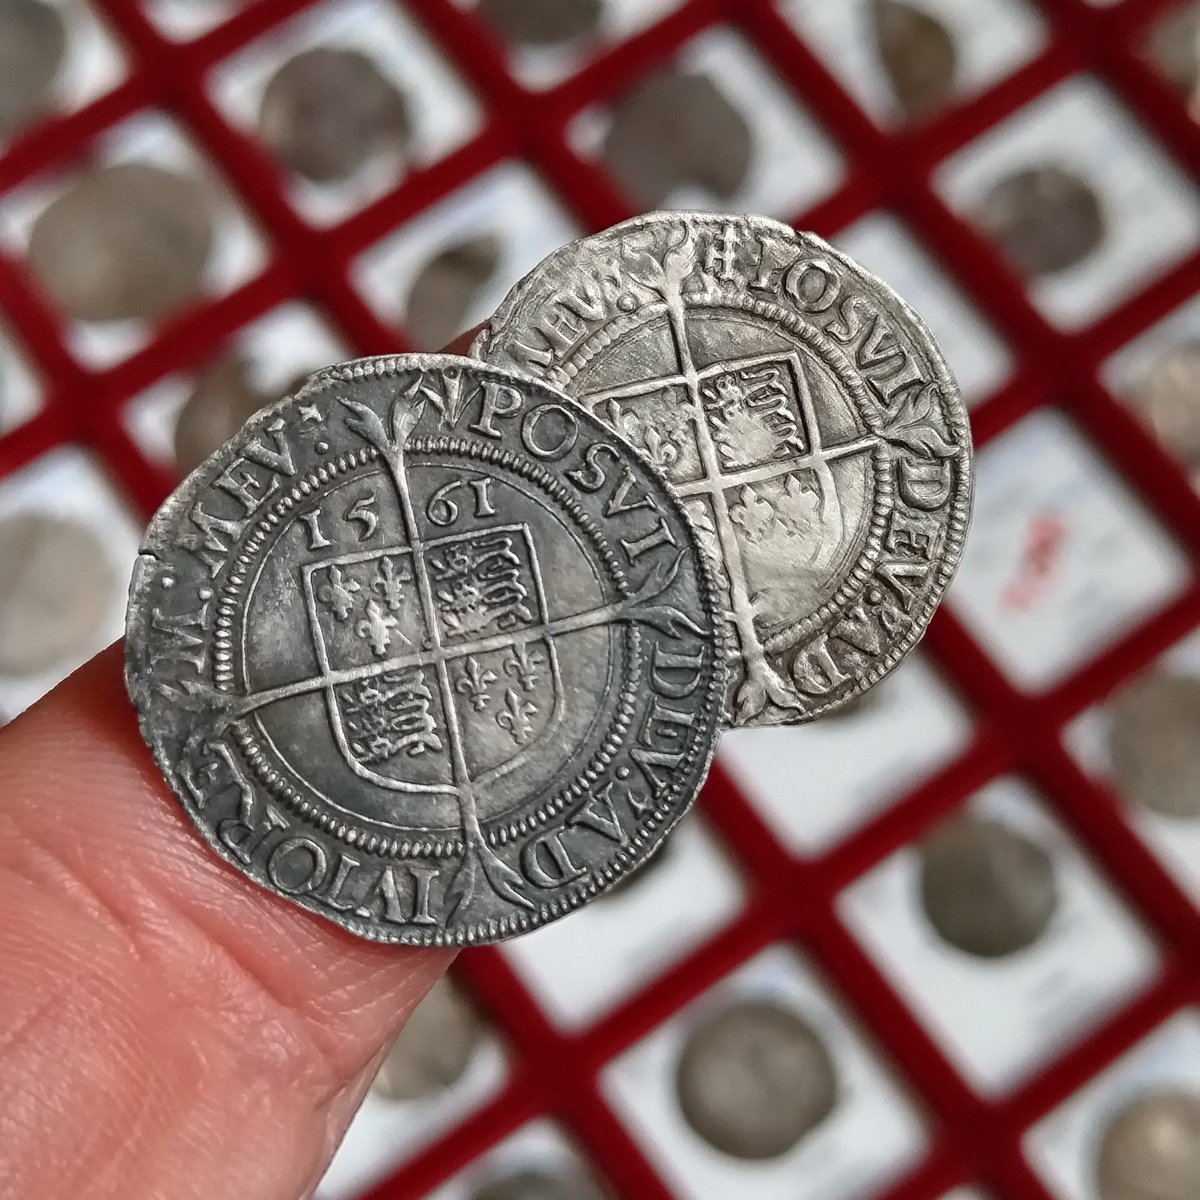 Both found 26th September last year, two of my best Elizabeth I coins.
Sixpence and groat.
AD 1560-1561